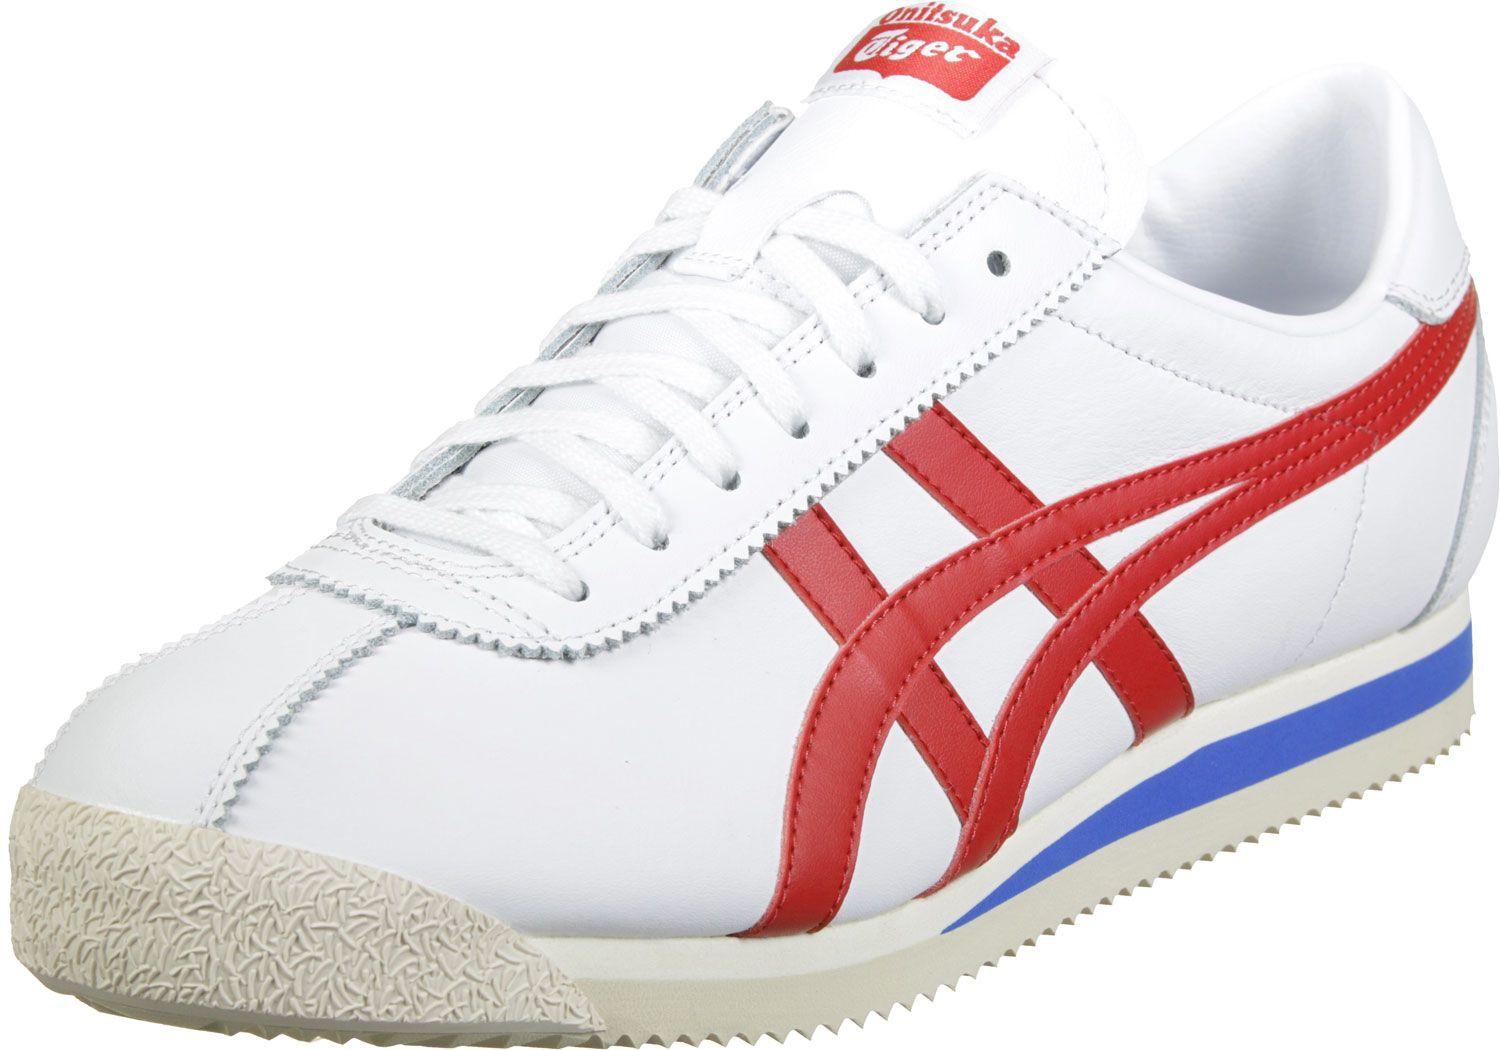 Red and Blue Shoes Logo - Onitsuka Tiger Tiger Corsair shoes white red blue